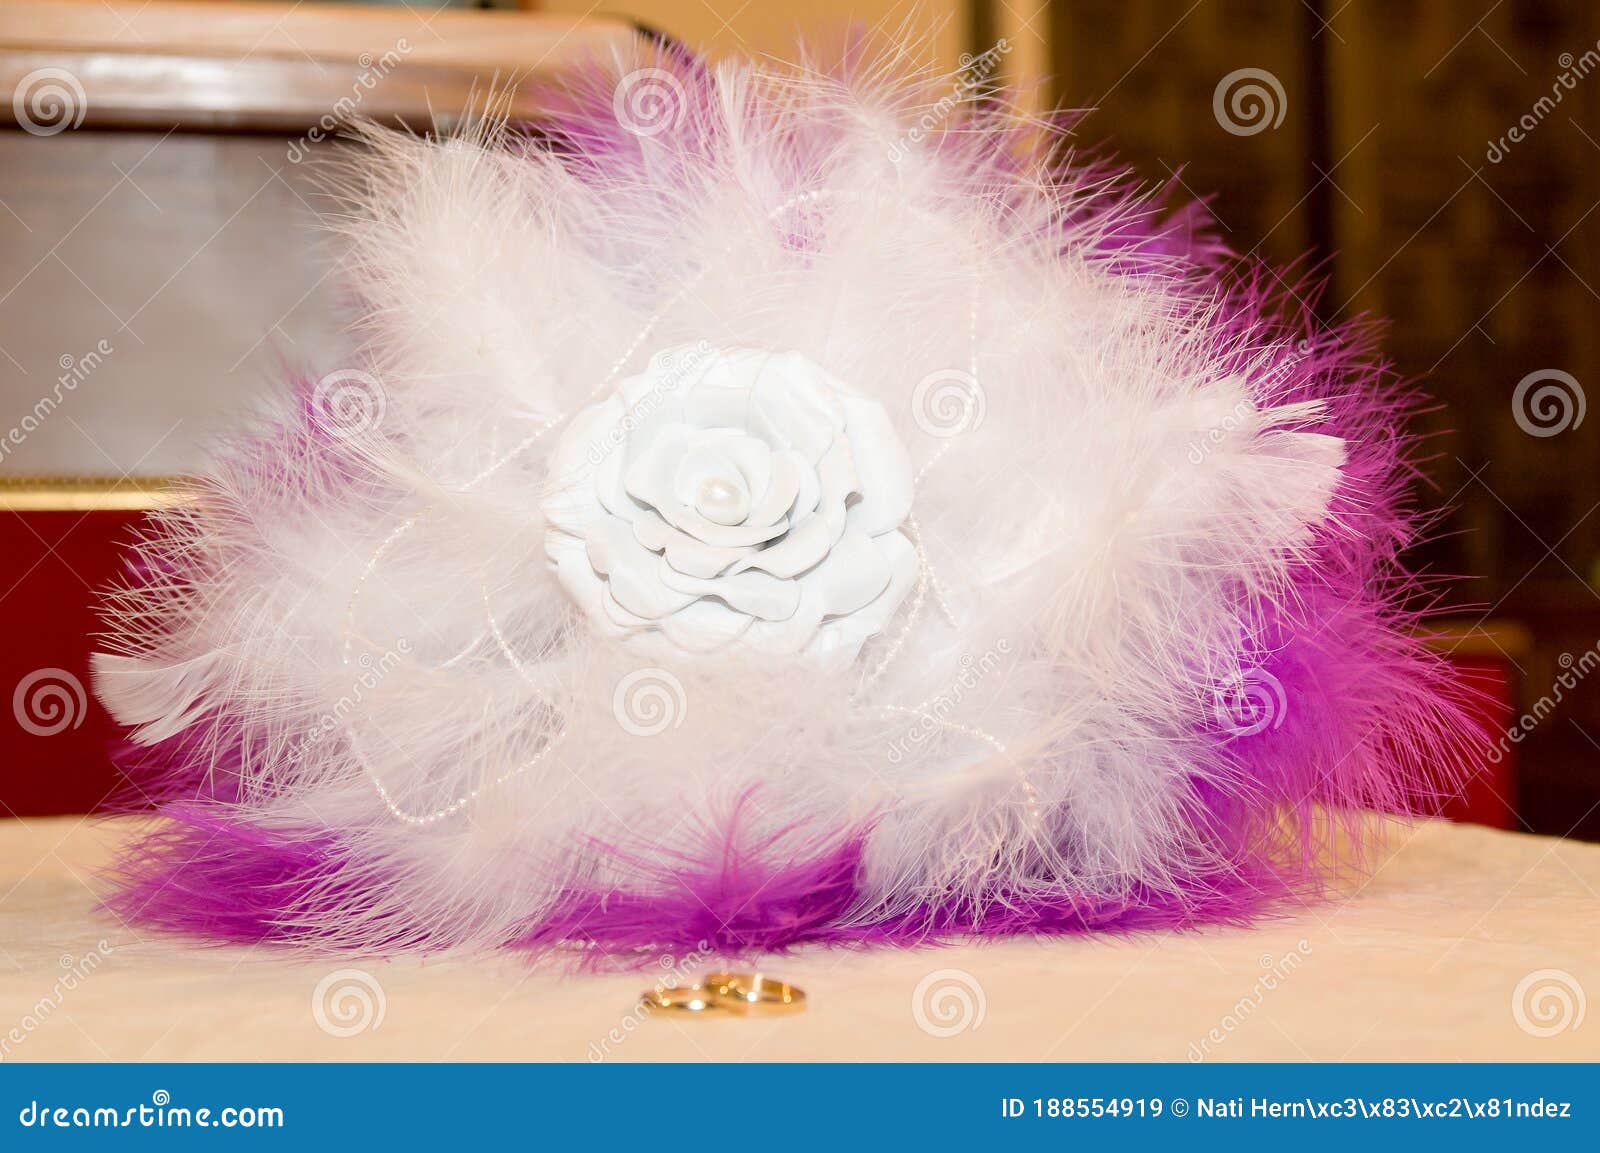 bridal bouquet made of white and purple feathers with a fabric flower in the center.